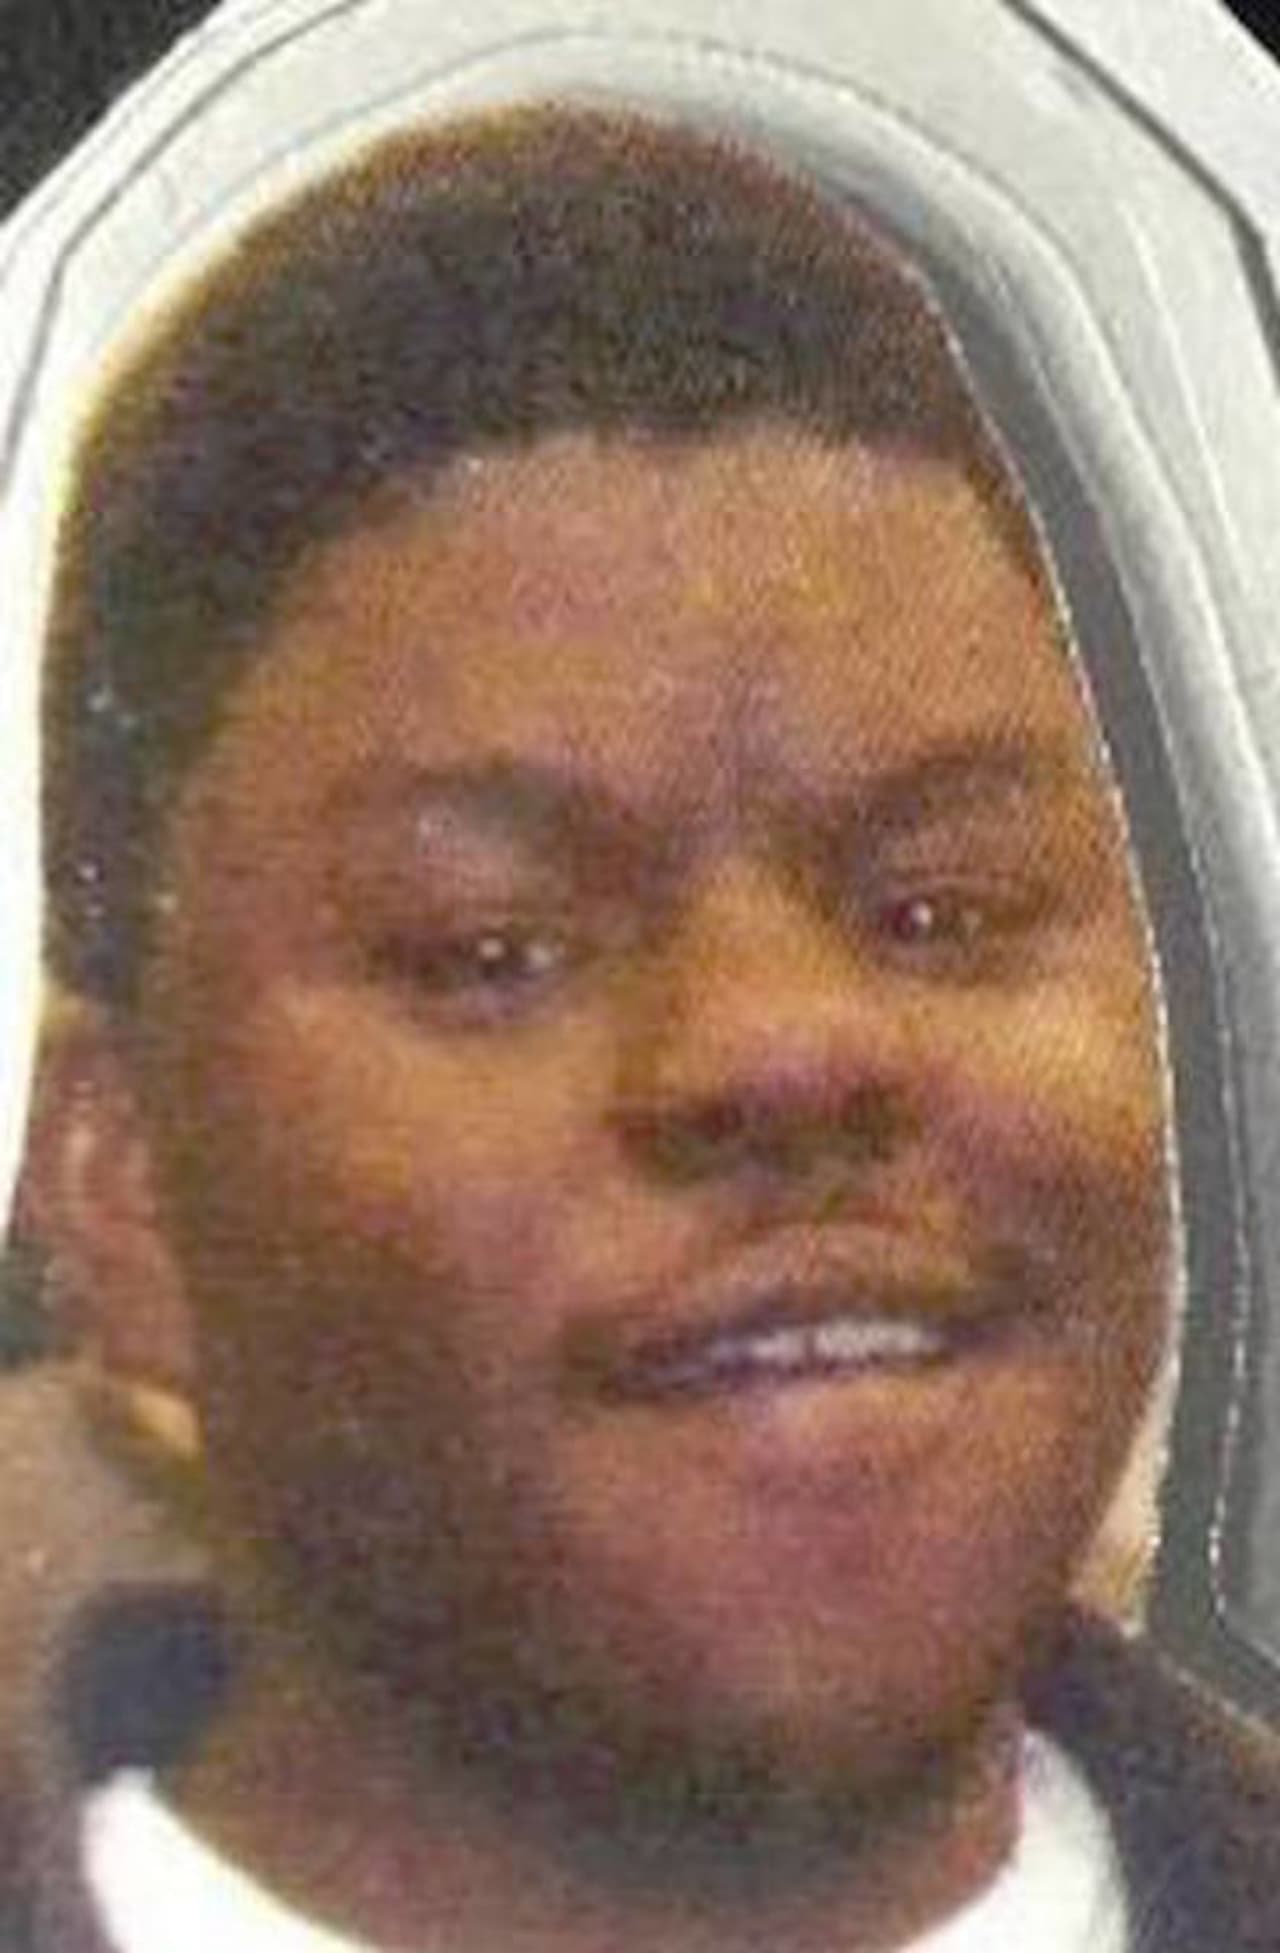 Public safety officials are looking for Dwight Rowe, 24, who is missing from his home in North Amityville.